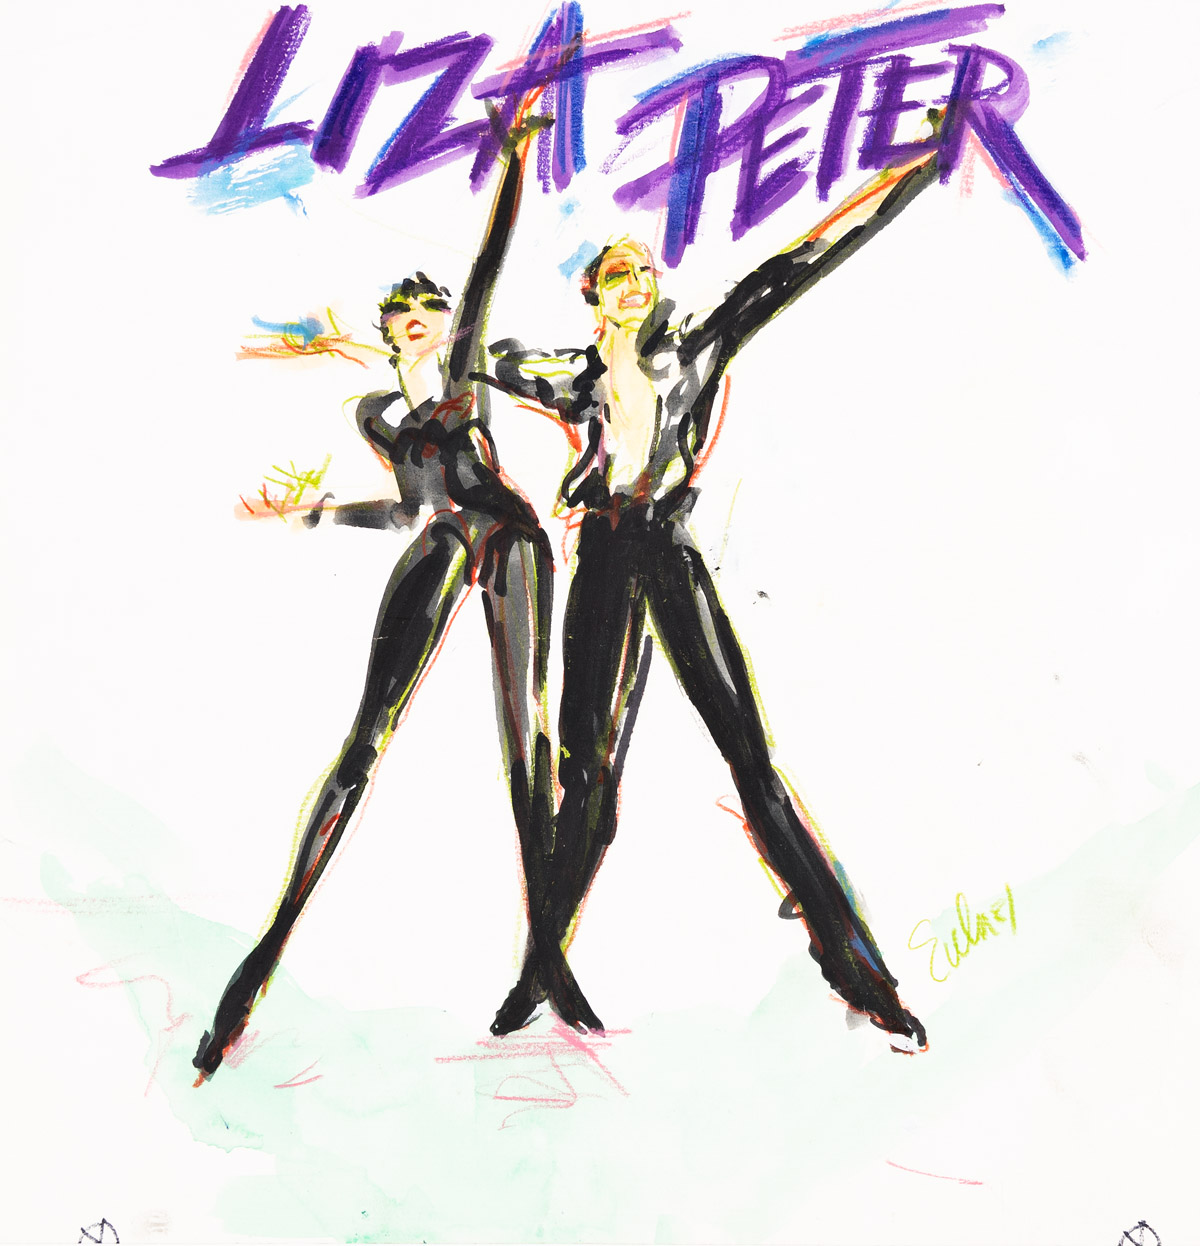 JOE EULA (1925-2004) Lizas Back! Portfolio of drawings of Liza Minnelli from her live album from 2002.